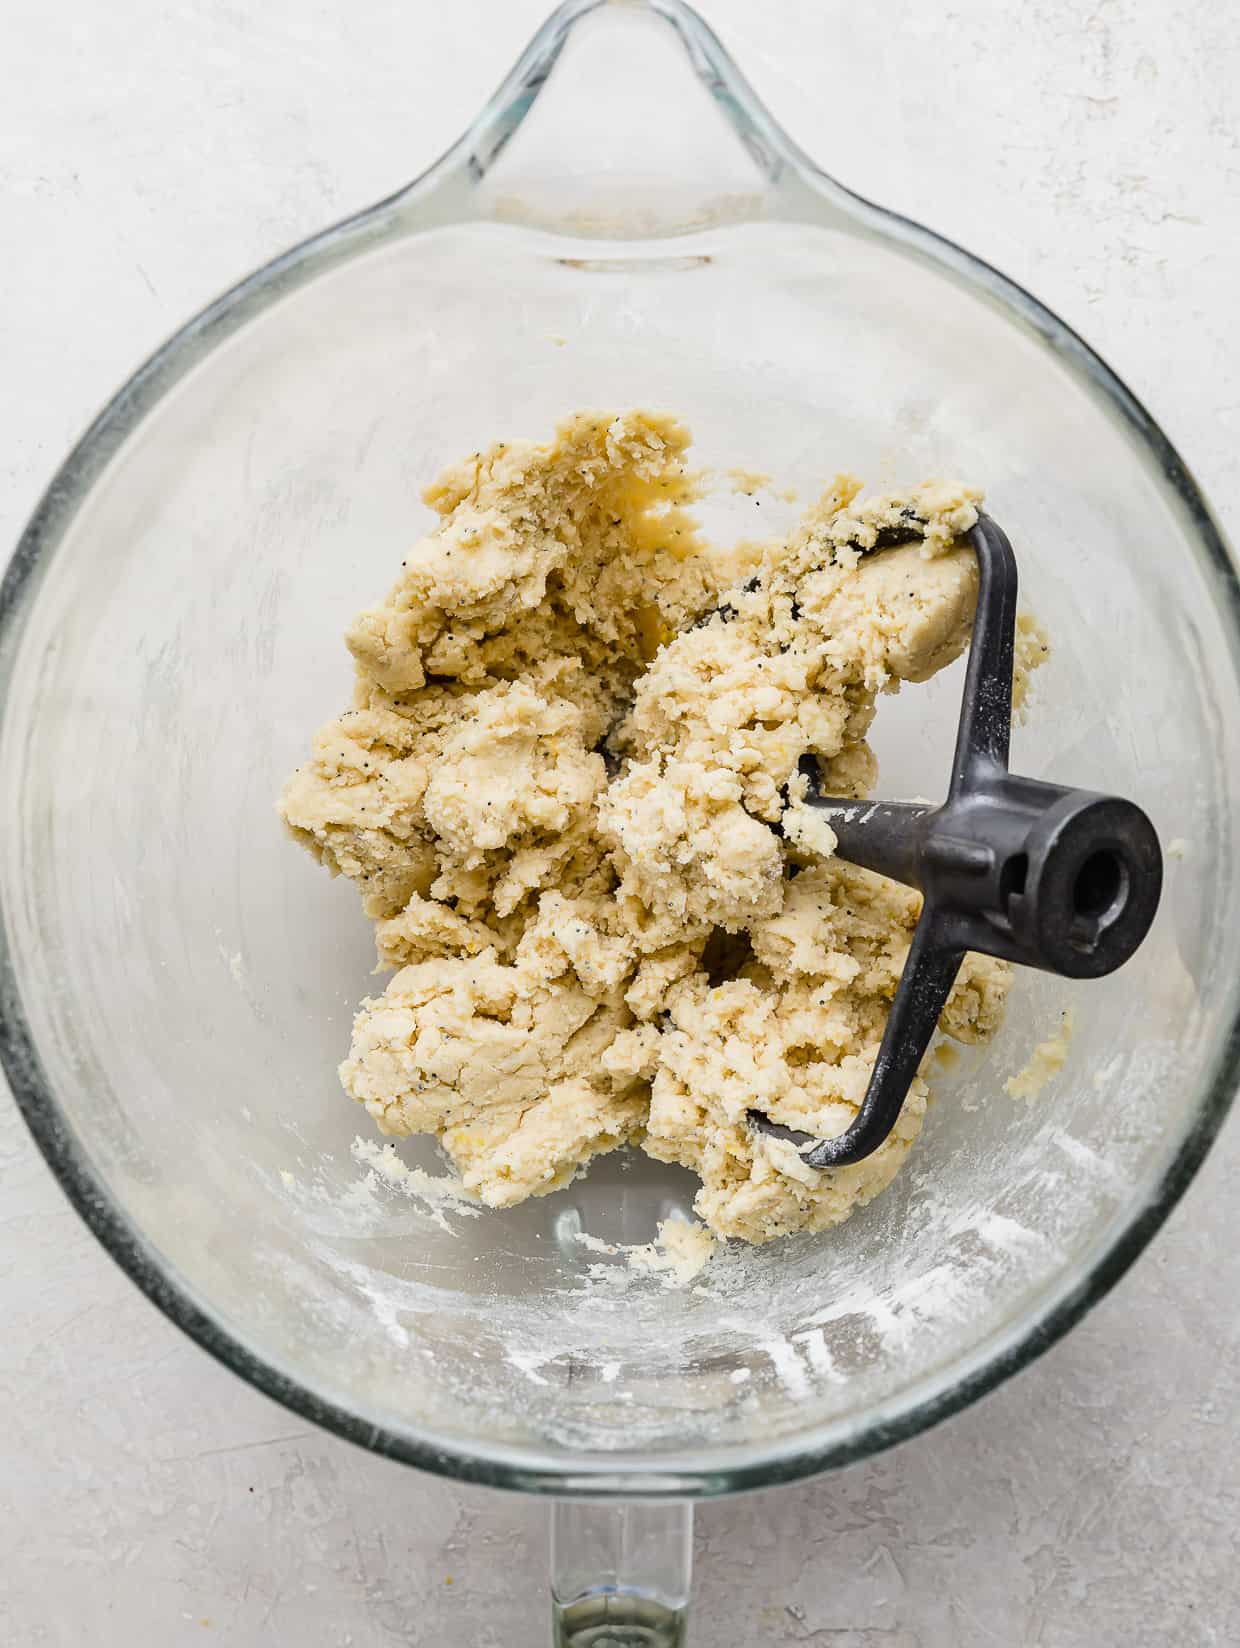 Lemon Poppy Seed Cookie dough in a glass bowl on a white background.